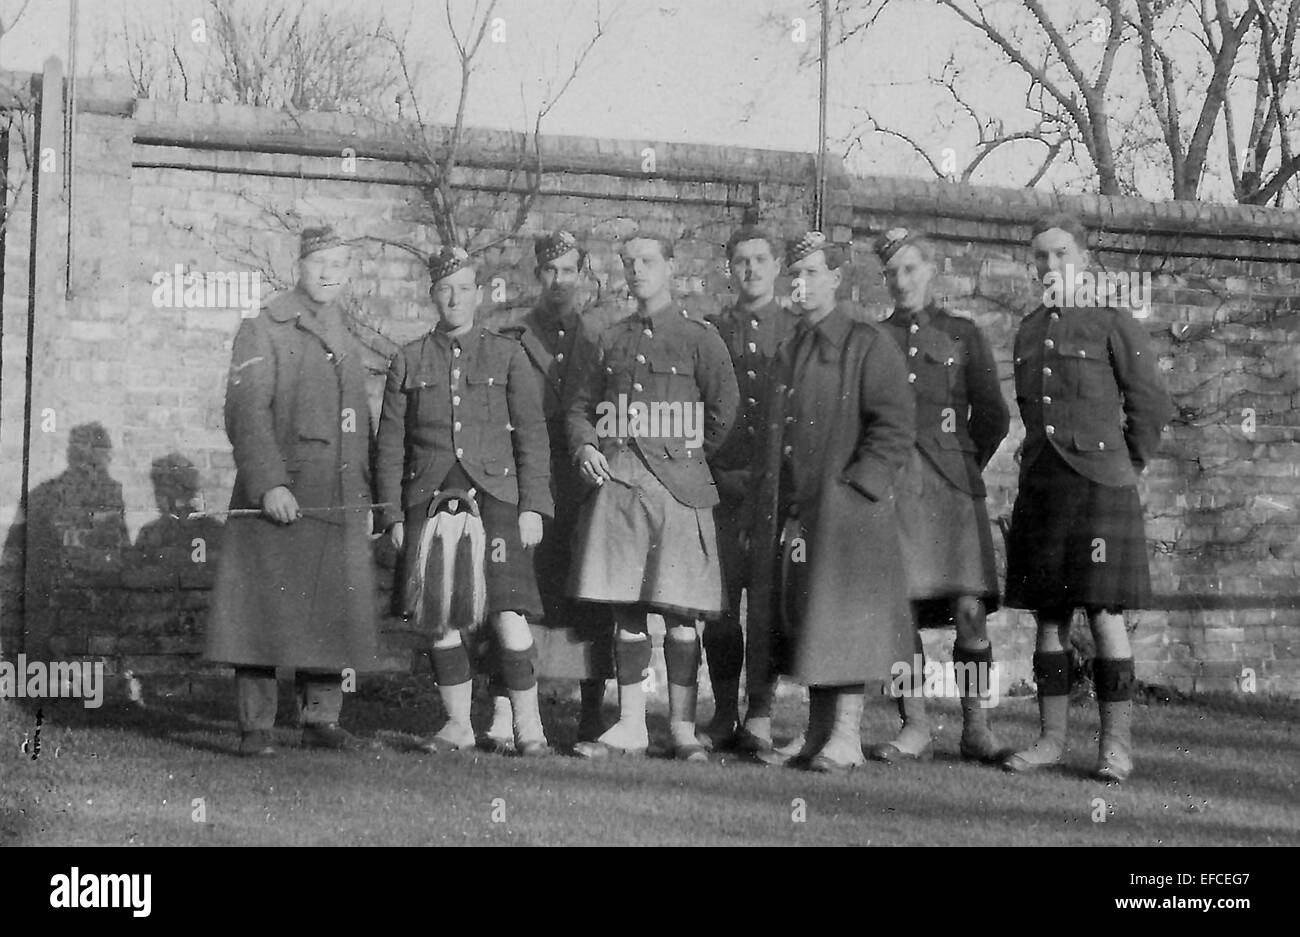 Aberdeen University's U Company, 4th Gordon Highlanders, 1914, Bedford.  Members in field uniforms with great coats and kilt aprons. Stock Photo